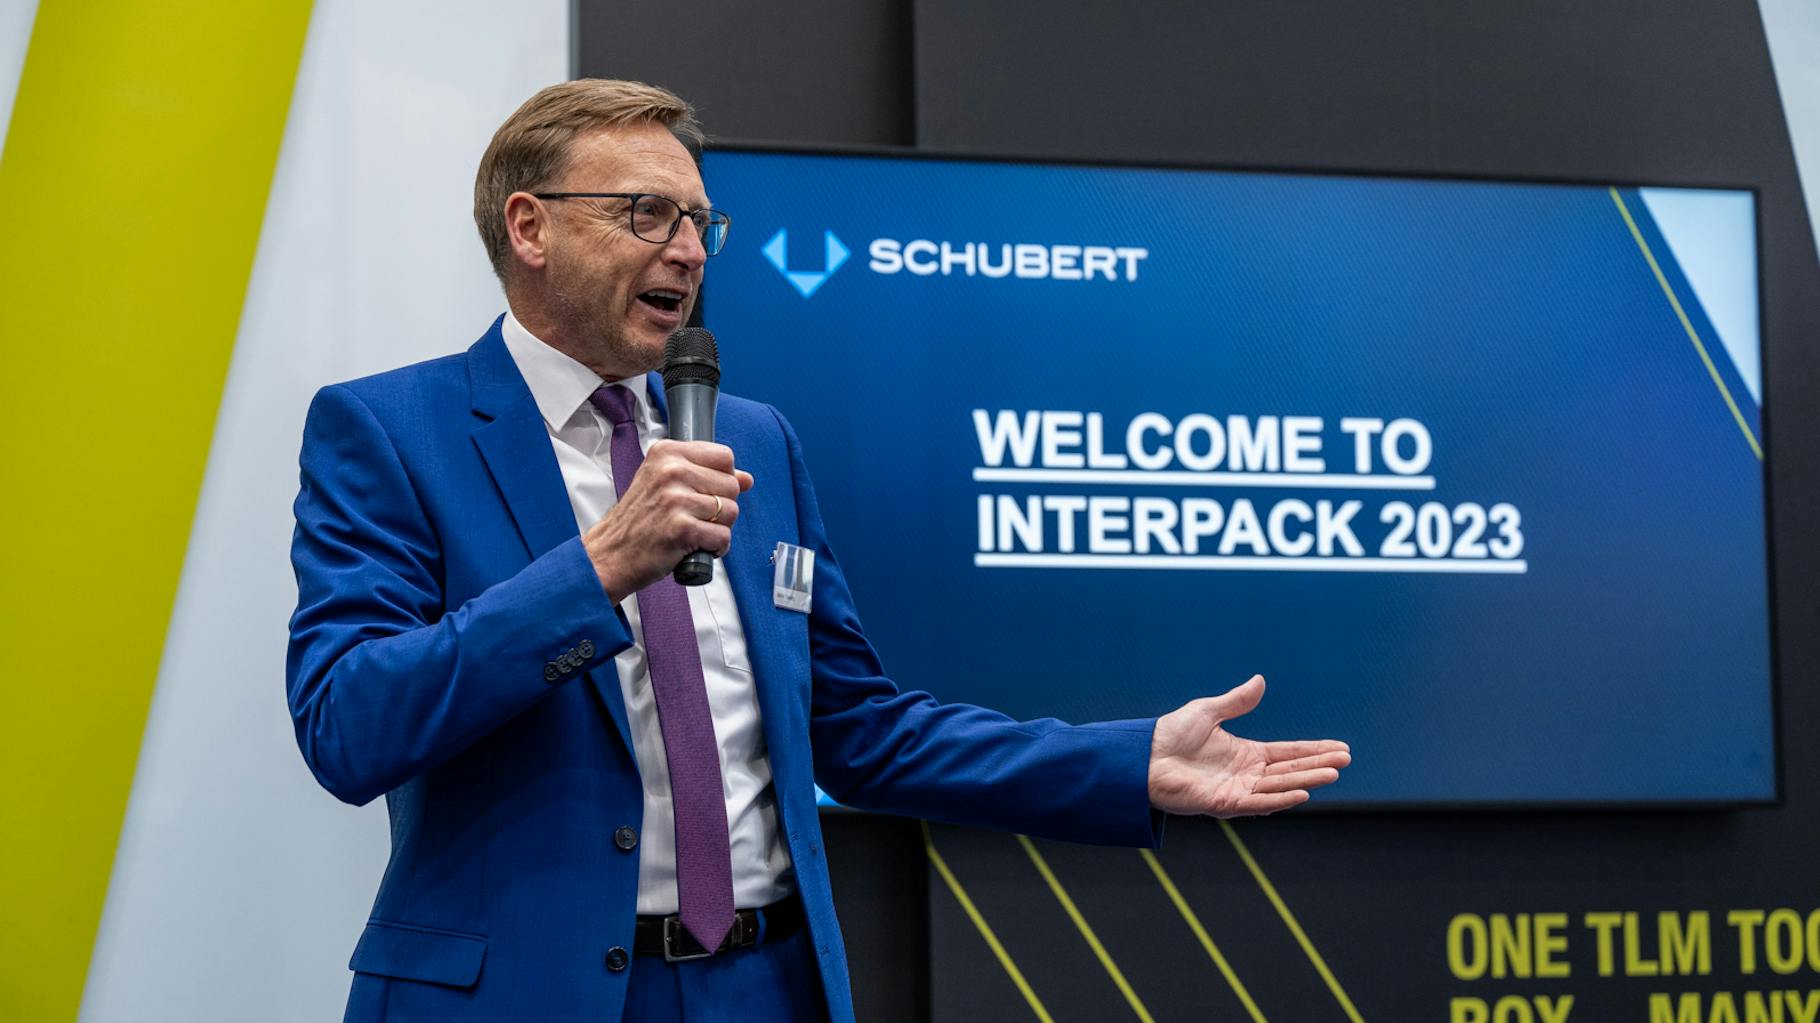 A speaker from pr agency schubert speaks into a microphone and stands in front of a monitor on which is written "welcome to interpack 2023".